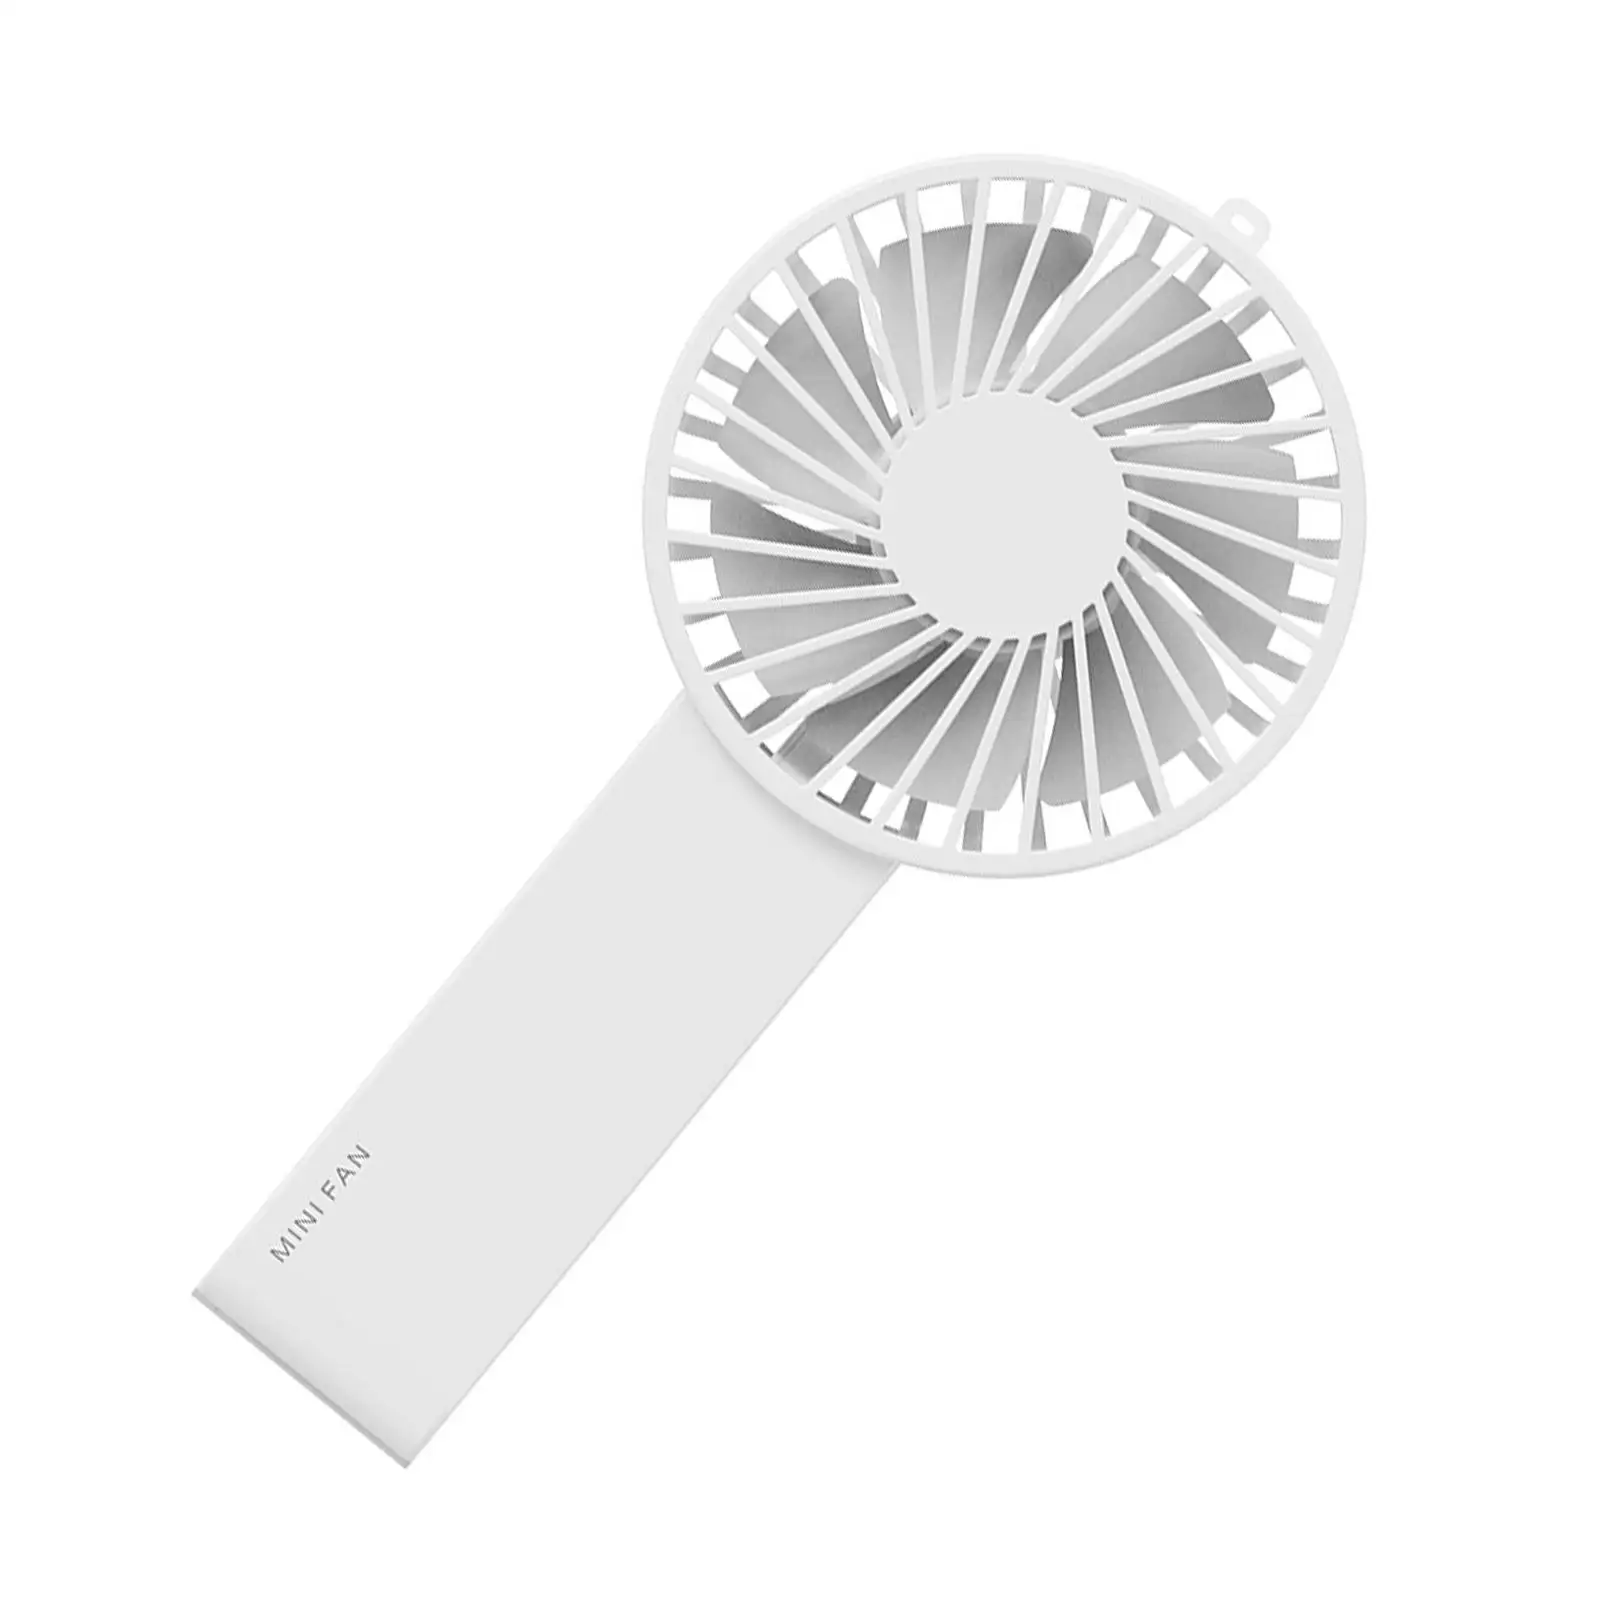 Portable Handheld Fan Low Noise Cooler 3 Speeds Adjustable Electric Personal Table Fan for Travel Outdoor Indoor Hiking Camping